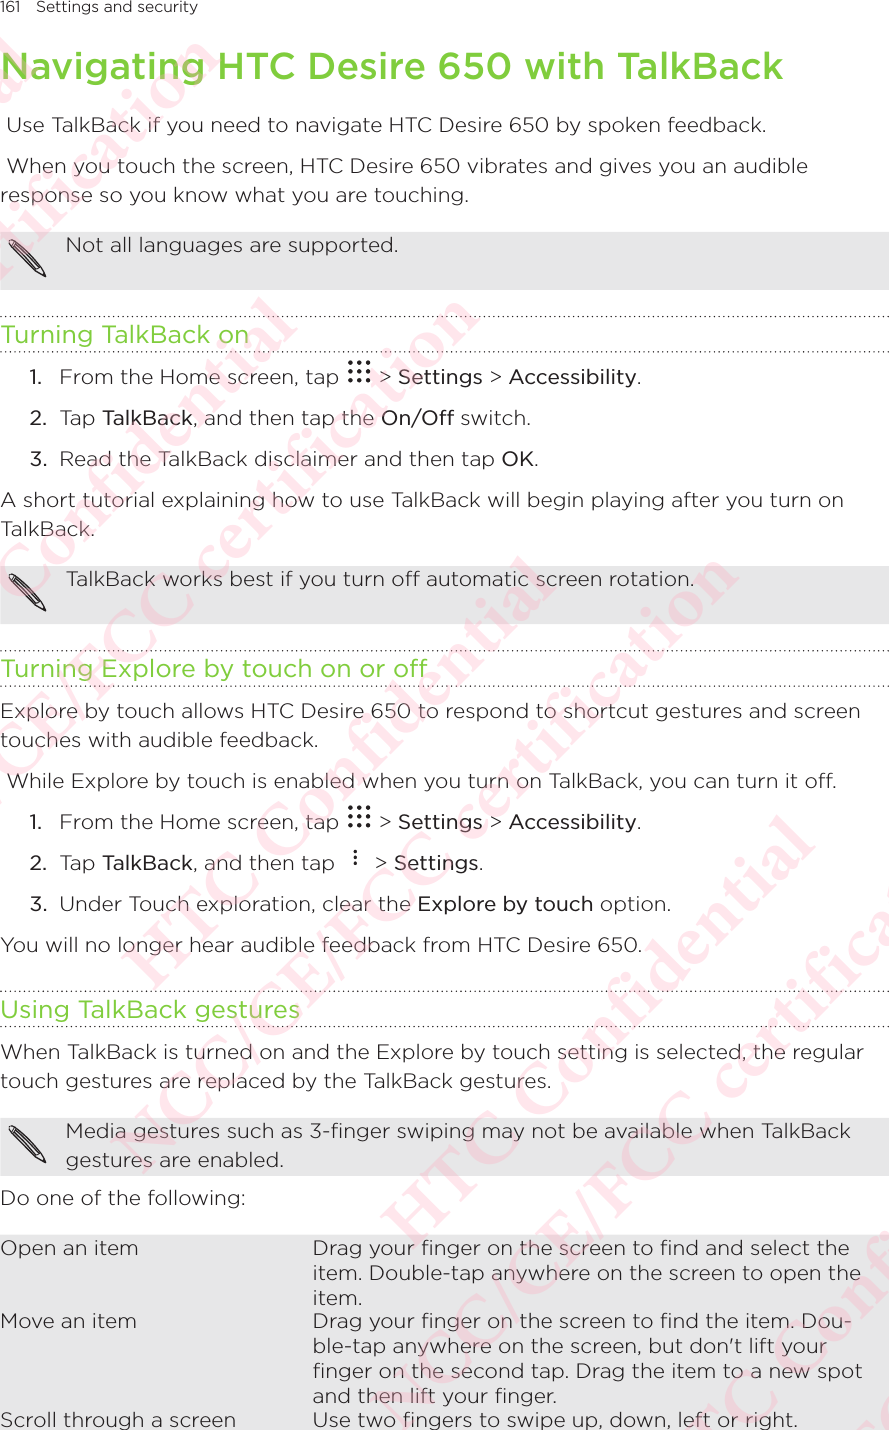 161 Settings and securityNavigating HTC Desire 650 with TalkBack Use TalkBack if you need to navigate HTC Desire 650 by spoken feedback.  When you touch the screen, HTC Desire 650 vibrates and gives you an audible response so you know what you are touching. Not all languages are supported. Turning TalkBack on1.  From the Home screen, tap   &gt; Settings &gt; Accessibility. 2.  Tap TalkBack, and then tap the On/Off switch. 3.  Read the TalkBack disclaimer and then tap OK. A short tutorial explaining how to use TalkBack will begin playing after you turn on TalkBack. TalkBack works best if you turn off automatic screen rotation. Turning Explore by touch on or offExplore by touch allows HTC Desire 650 to respond to shortcut gestures and screen touches with audible feedback.  While Explore by touch is enabled when you turn on TalkBack, you can turn it off.1.  From the Home screen, tap   &gt; Settings &gt; Accessibility. 2.  Tap TalkBack, and then tap   &gt; Settings. 3.  Under Touch exploration, clear the Explore by touch option. You will no longer hear audible feedback from HTC Desire 650. Using TalkBack gesturesWhen TalkBack is turned on and the Explore by touch setting is selected, the regular touch gestures are replaced by the TalkBack gestures. Media gestures such as 3-finger swiping may not be available when TalkBack gestures are enabled. Do one of the following: Open an item Drag your ﬁnger on the screen to ﬁnd and select the item. Double-tap anywhere on the screen to open the item. Move an item Drag your ﬁnger on the screen to ﬁnd the item. Dou-ble-tap anywhere on the screen, but don&apos;t lift your ﬁnger on the second tap. Drag the item to a new spot and then lift your ﬁnger. Scroll through a screen Use two ﬁngers to swipe up, down, left or right. HTC Confidential NCC/CE/FCC certification  HTC Confidential NCC/CE/FCC certification  HTC Confidential NCC/CE/FCC certification  HTC Confidential NCC/CE/FCC certification  HTC Confidential NCC/CE/FCC certification